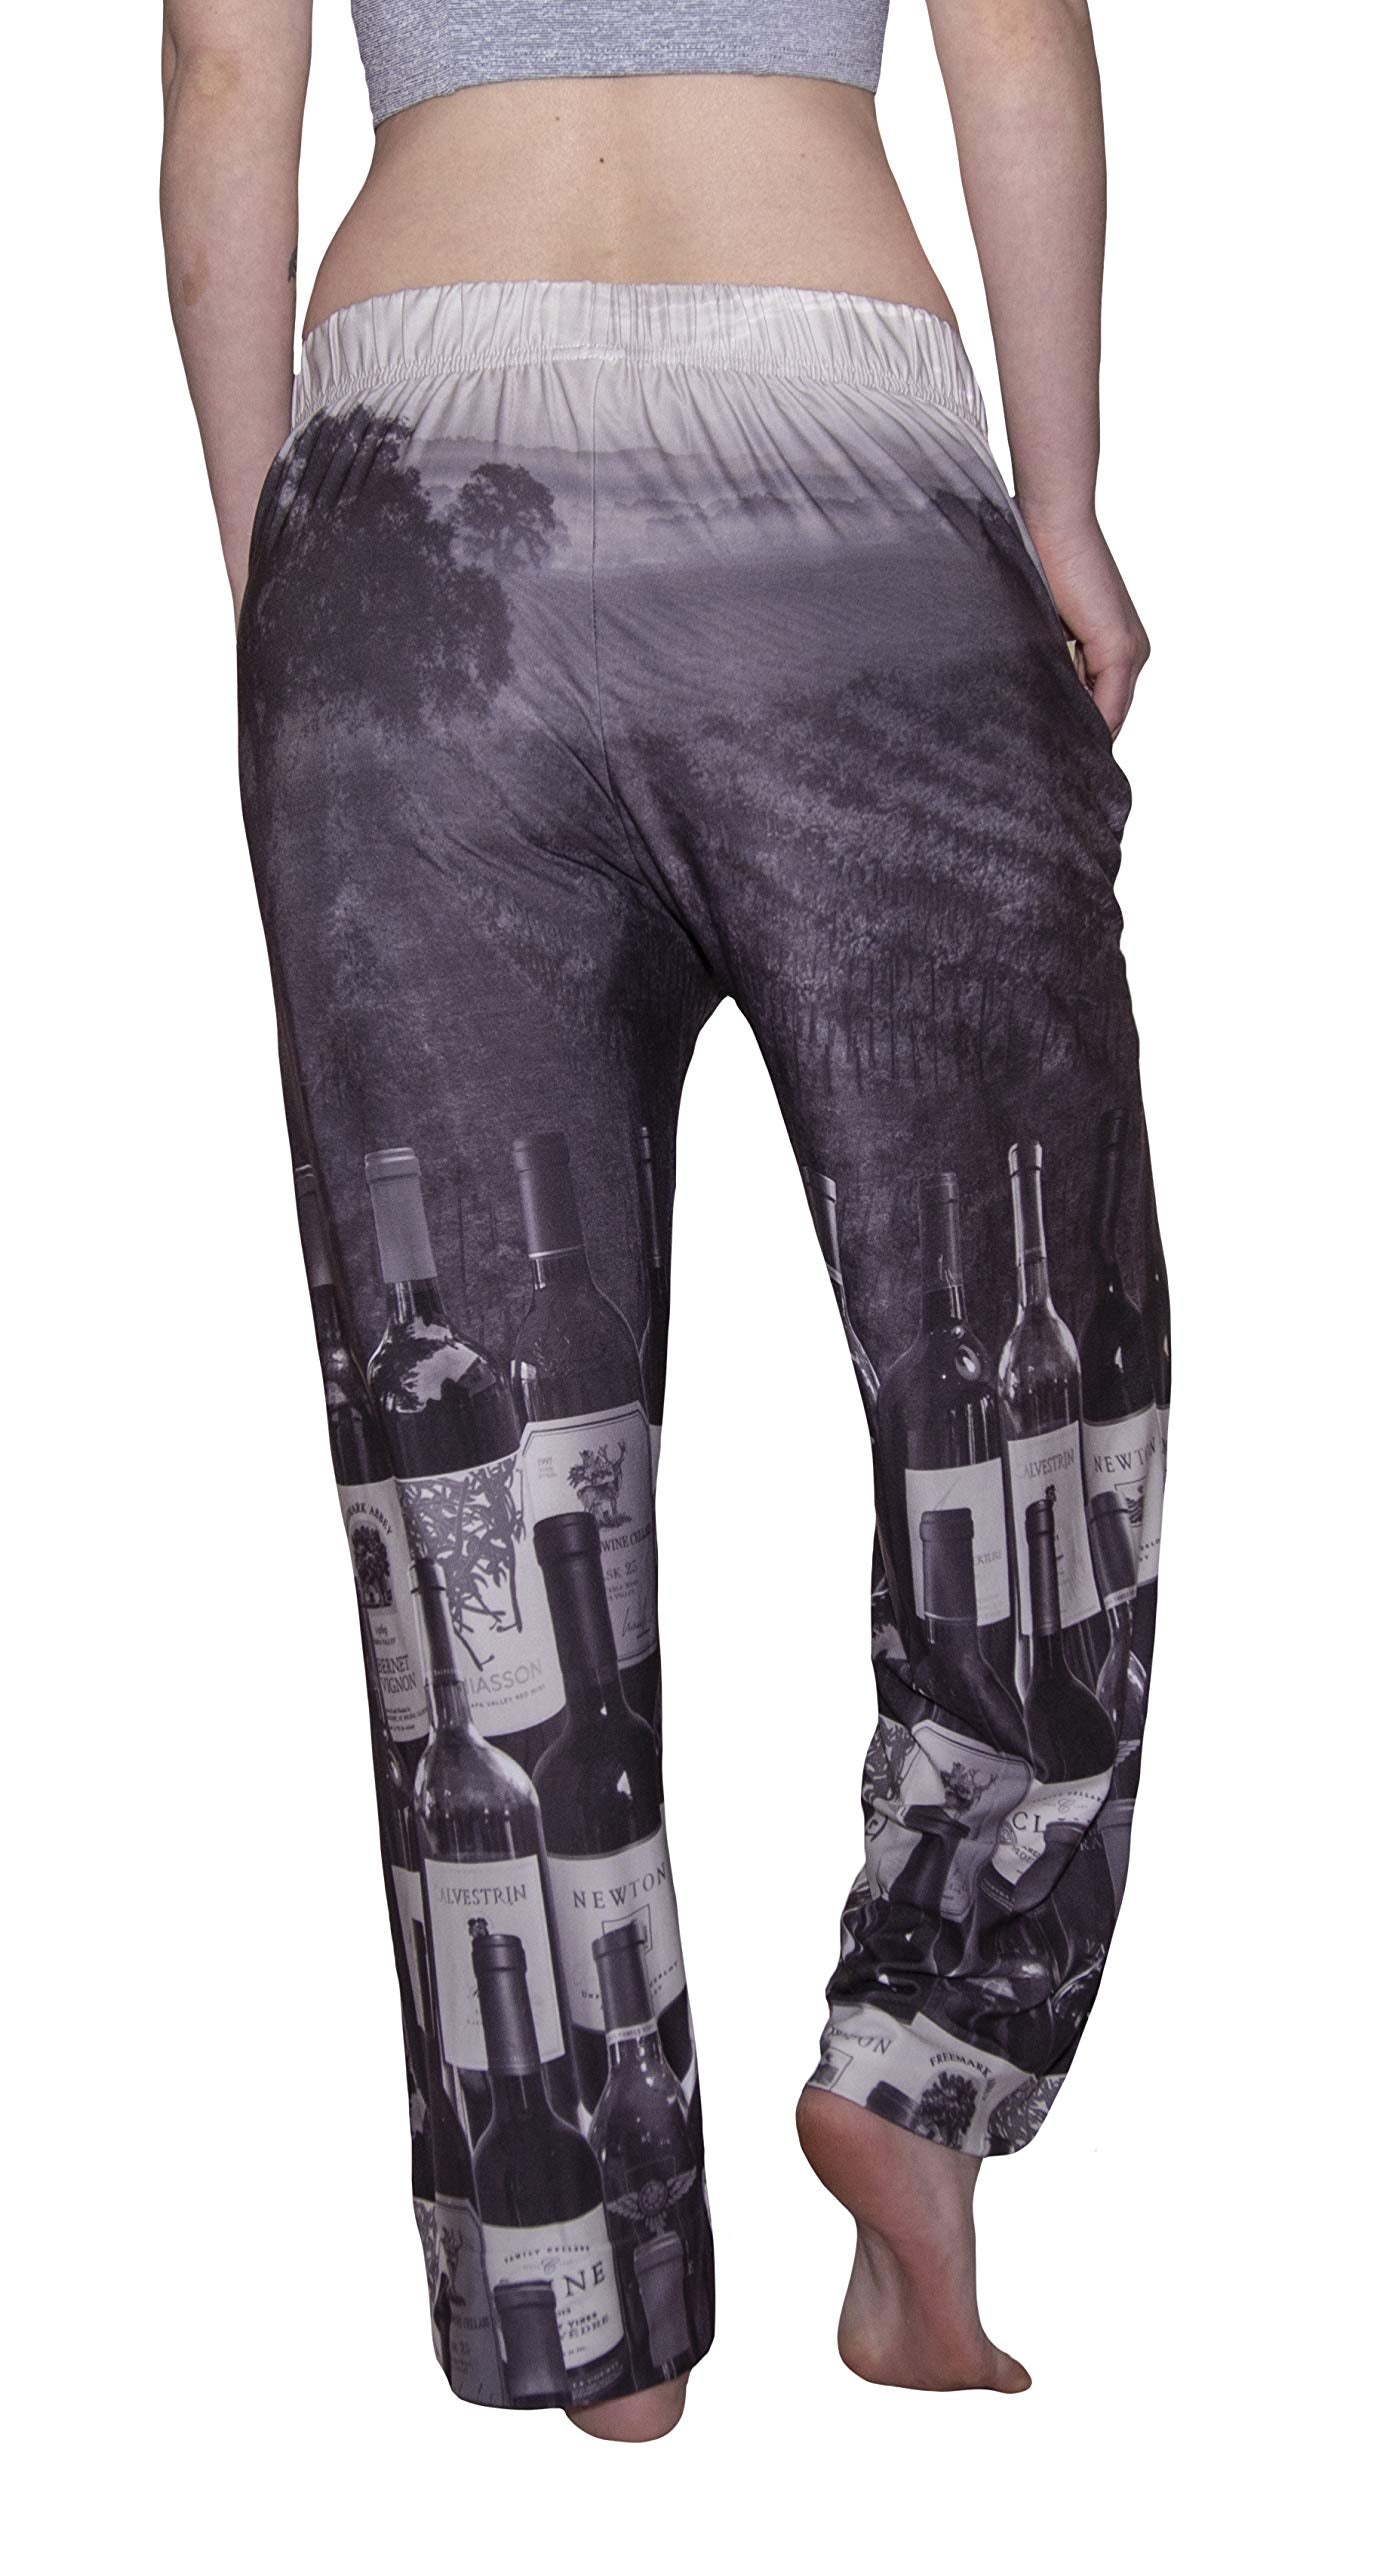 Waist down photo of model wearing Time To Wine pajama lounge pants back view (white background)